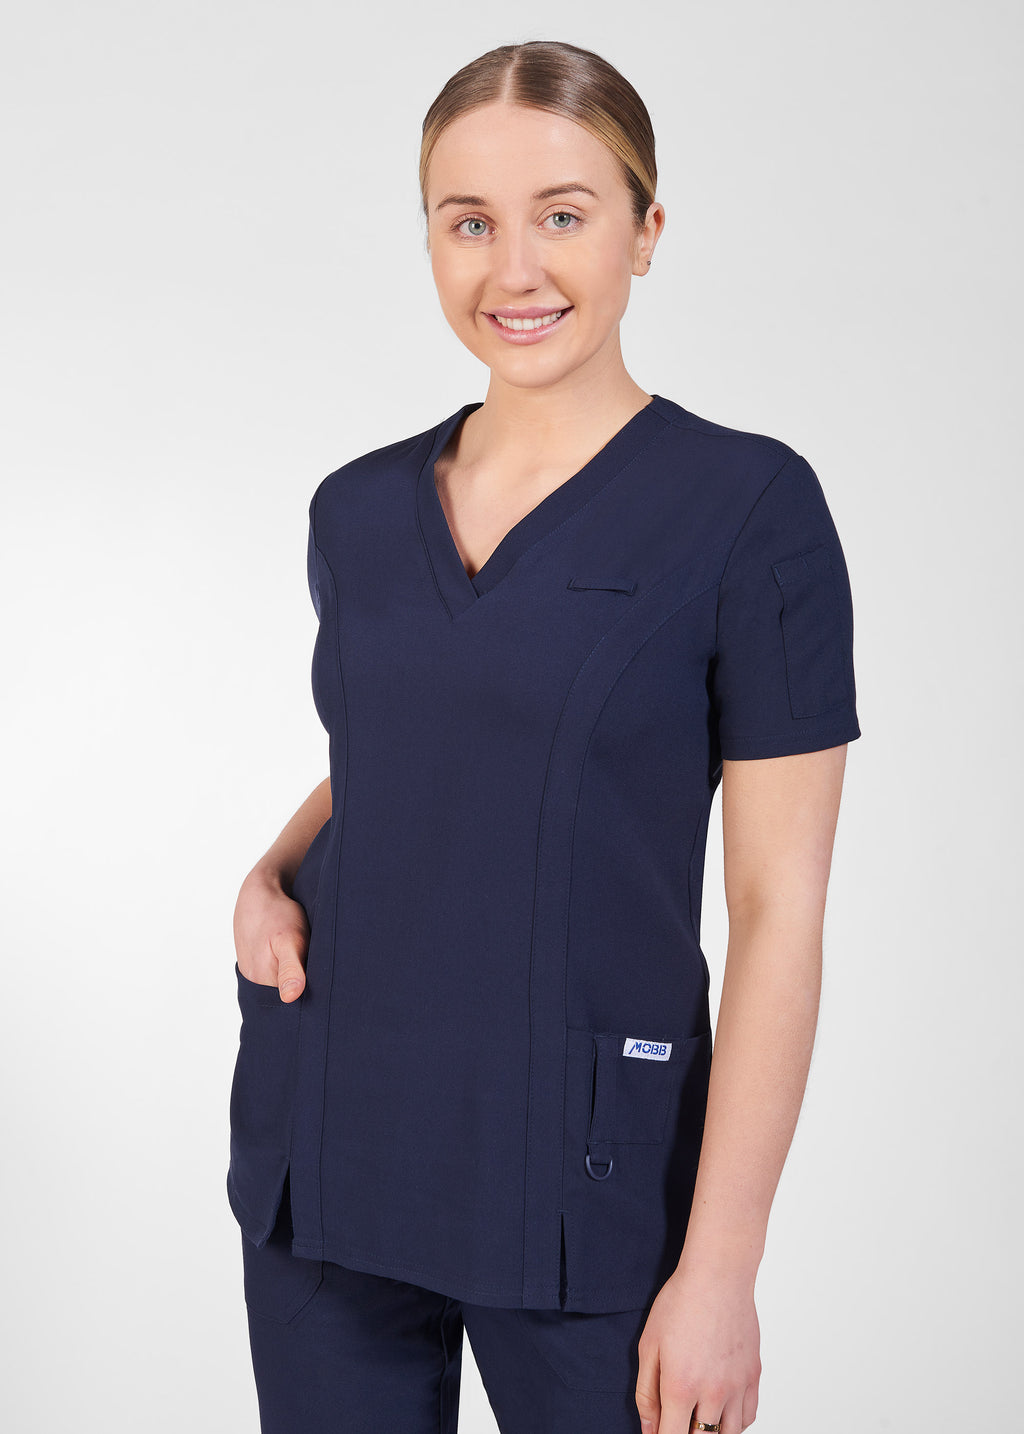 Product - The Cathy MOBB Scrub Top